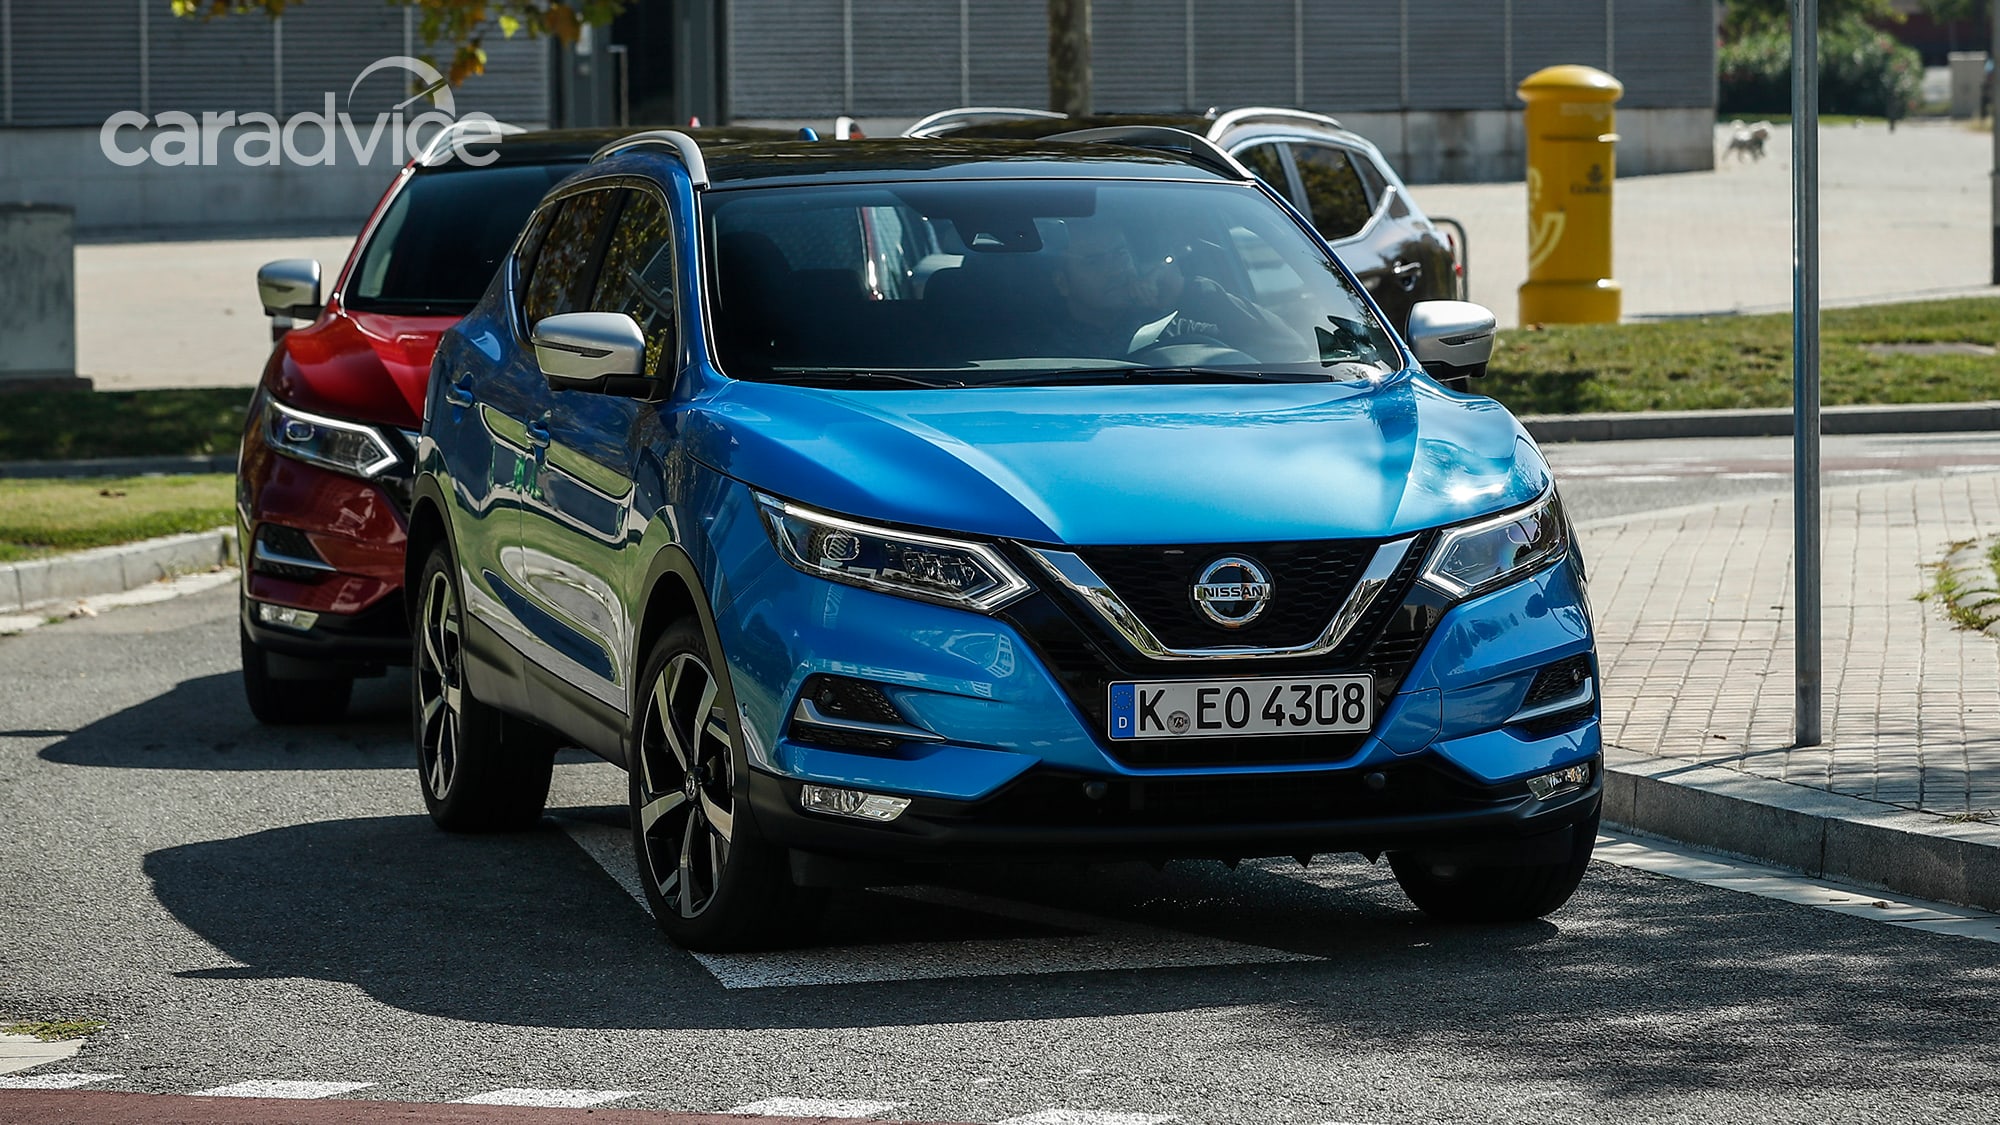 2019 Nissan Qashqai gets Apple CarPlay, Android Auto in